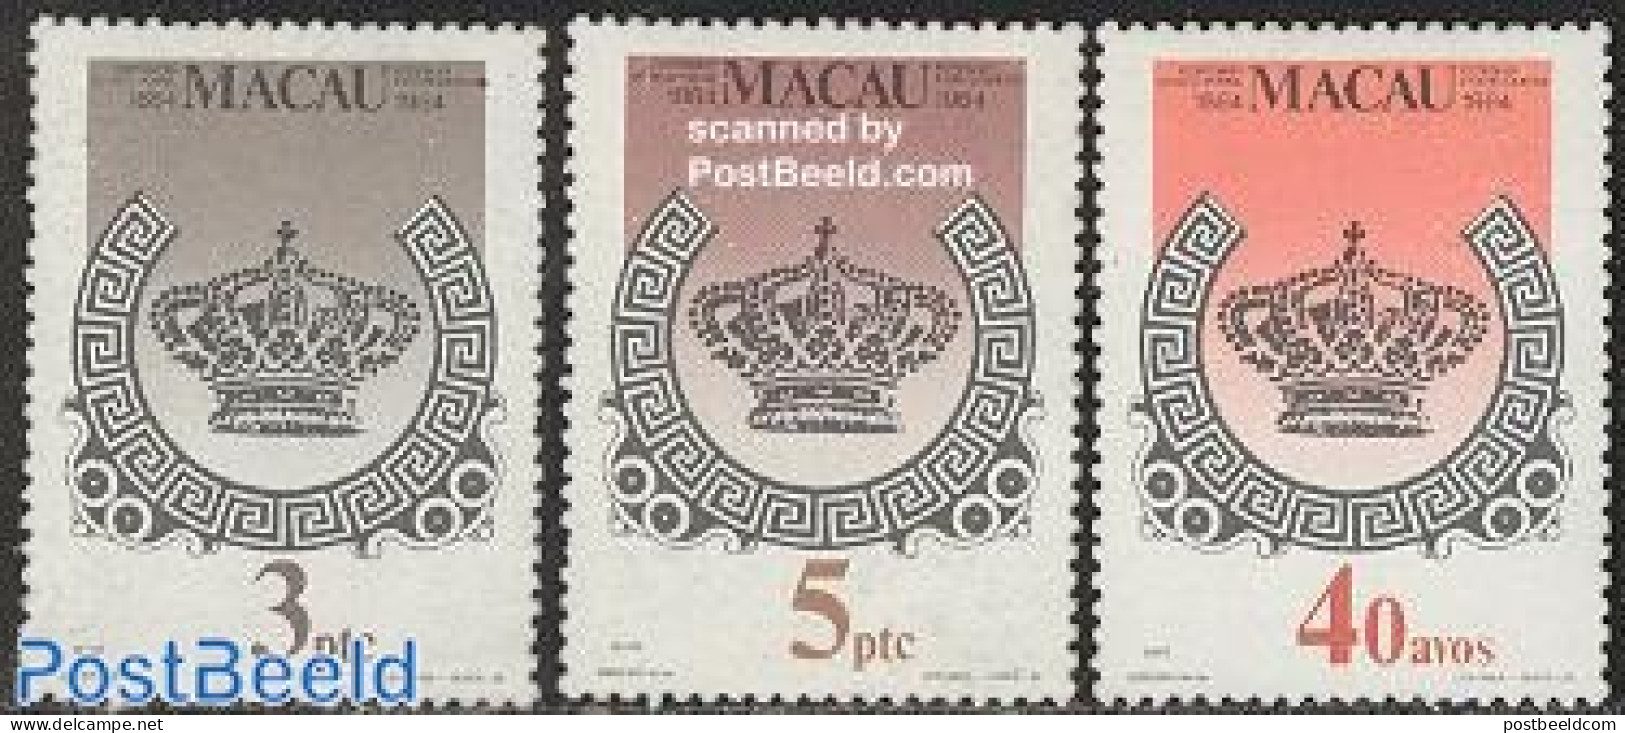 Macao 1984 Stamp Centenary 3v, Mint NH, 100 Years Stamps - Post - Stamps On Stamps - Ongebruikt